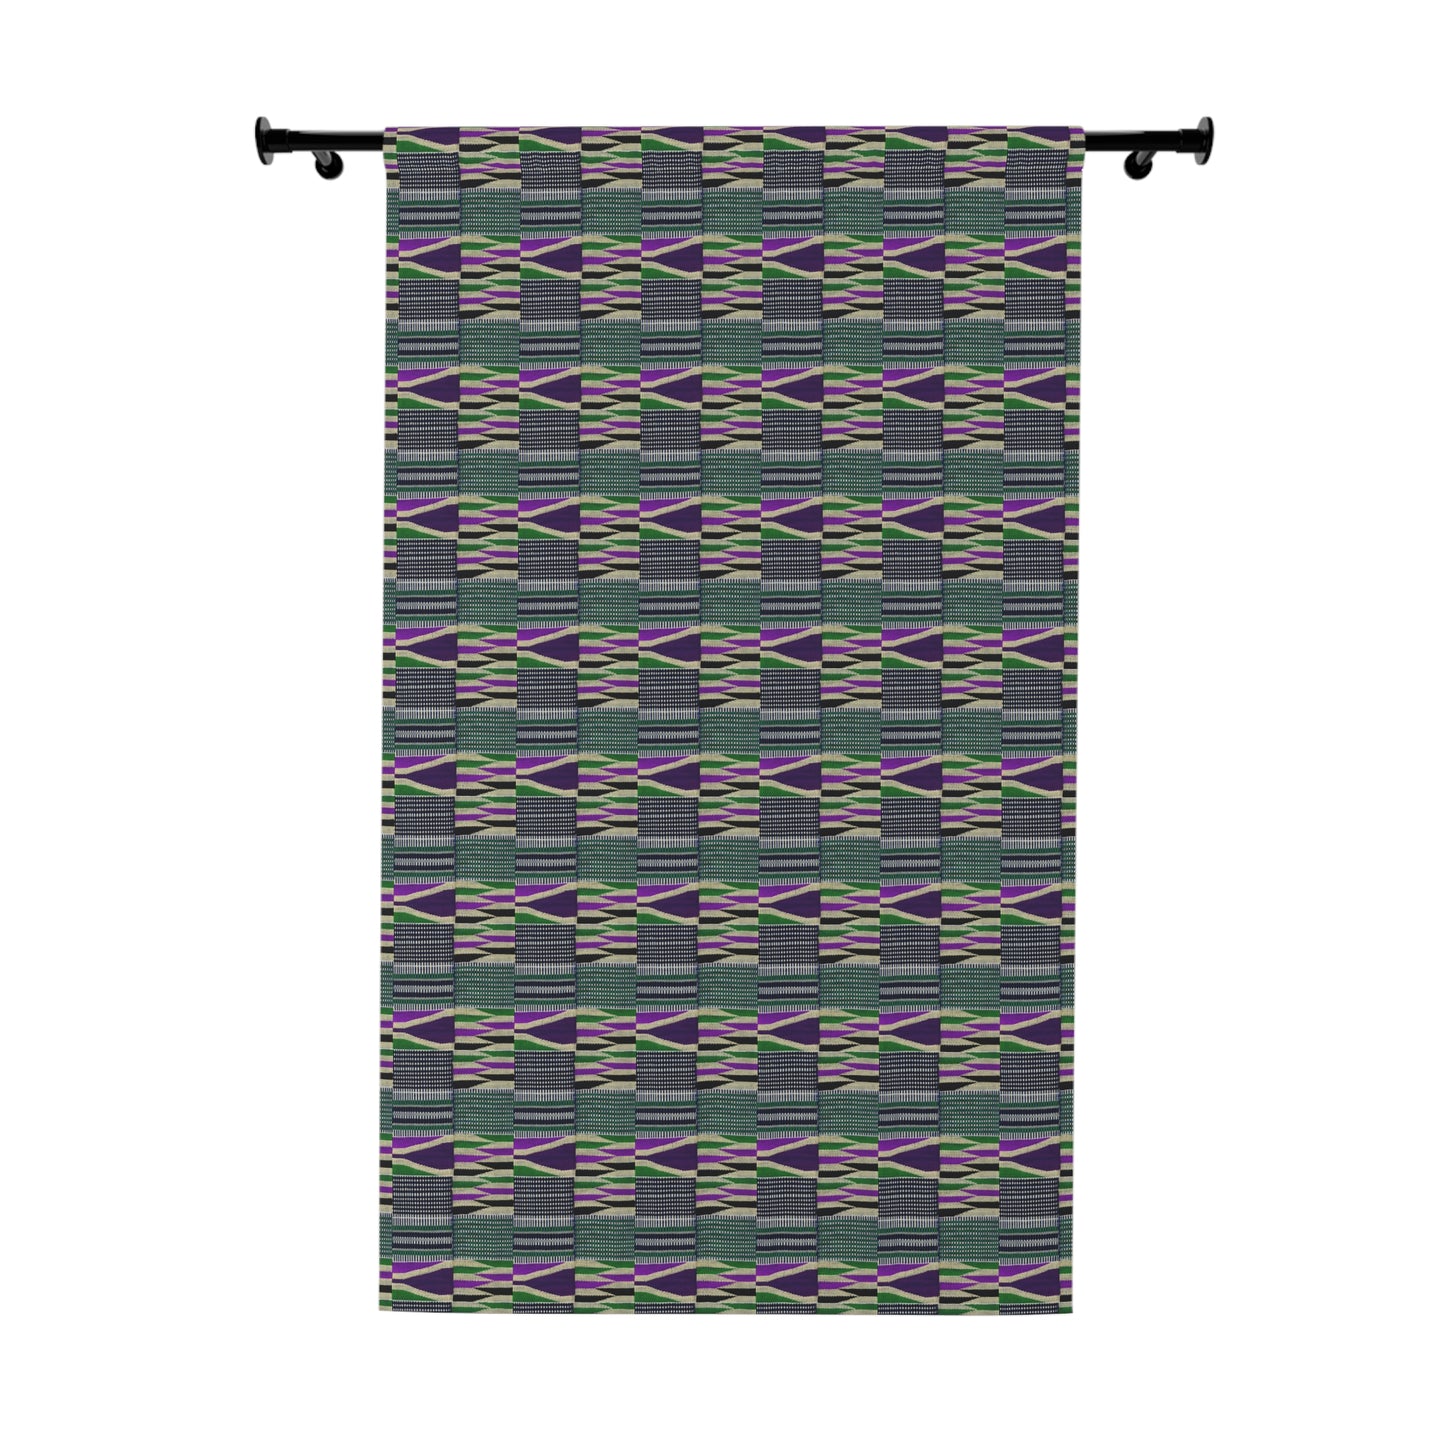 Boho Curtains in African Kente Cloth Inspired - Purple